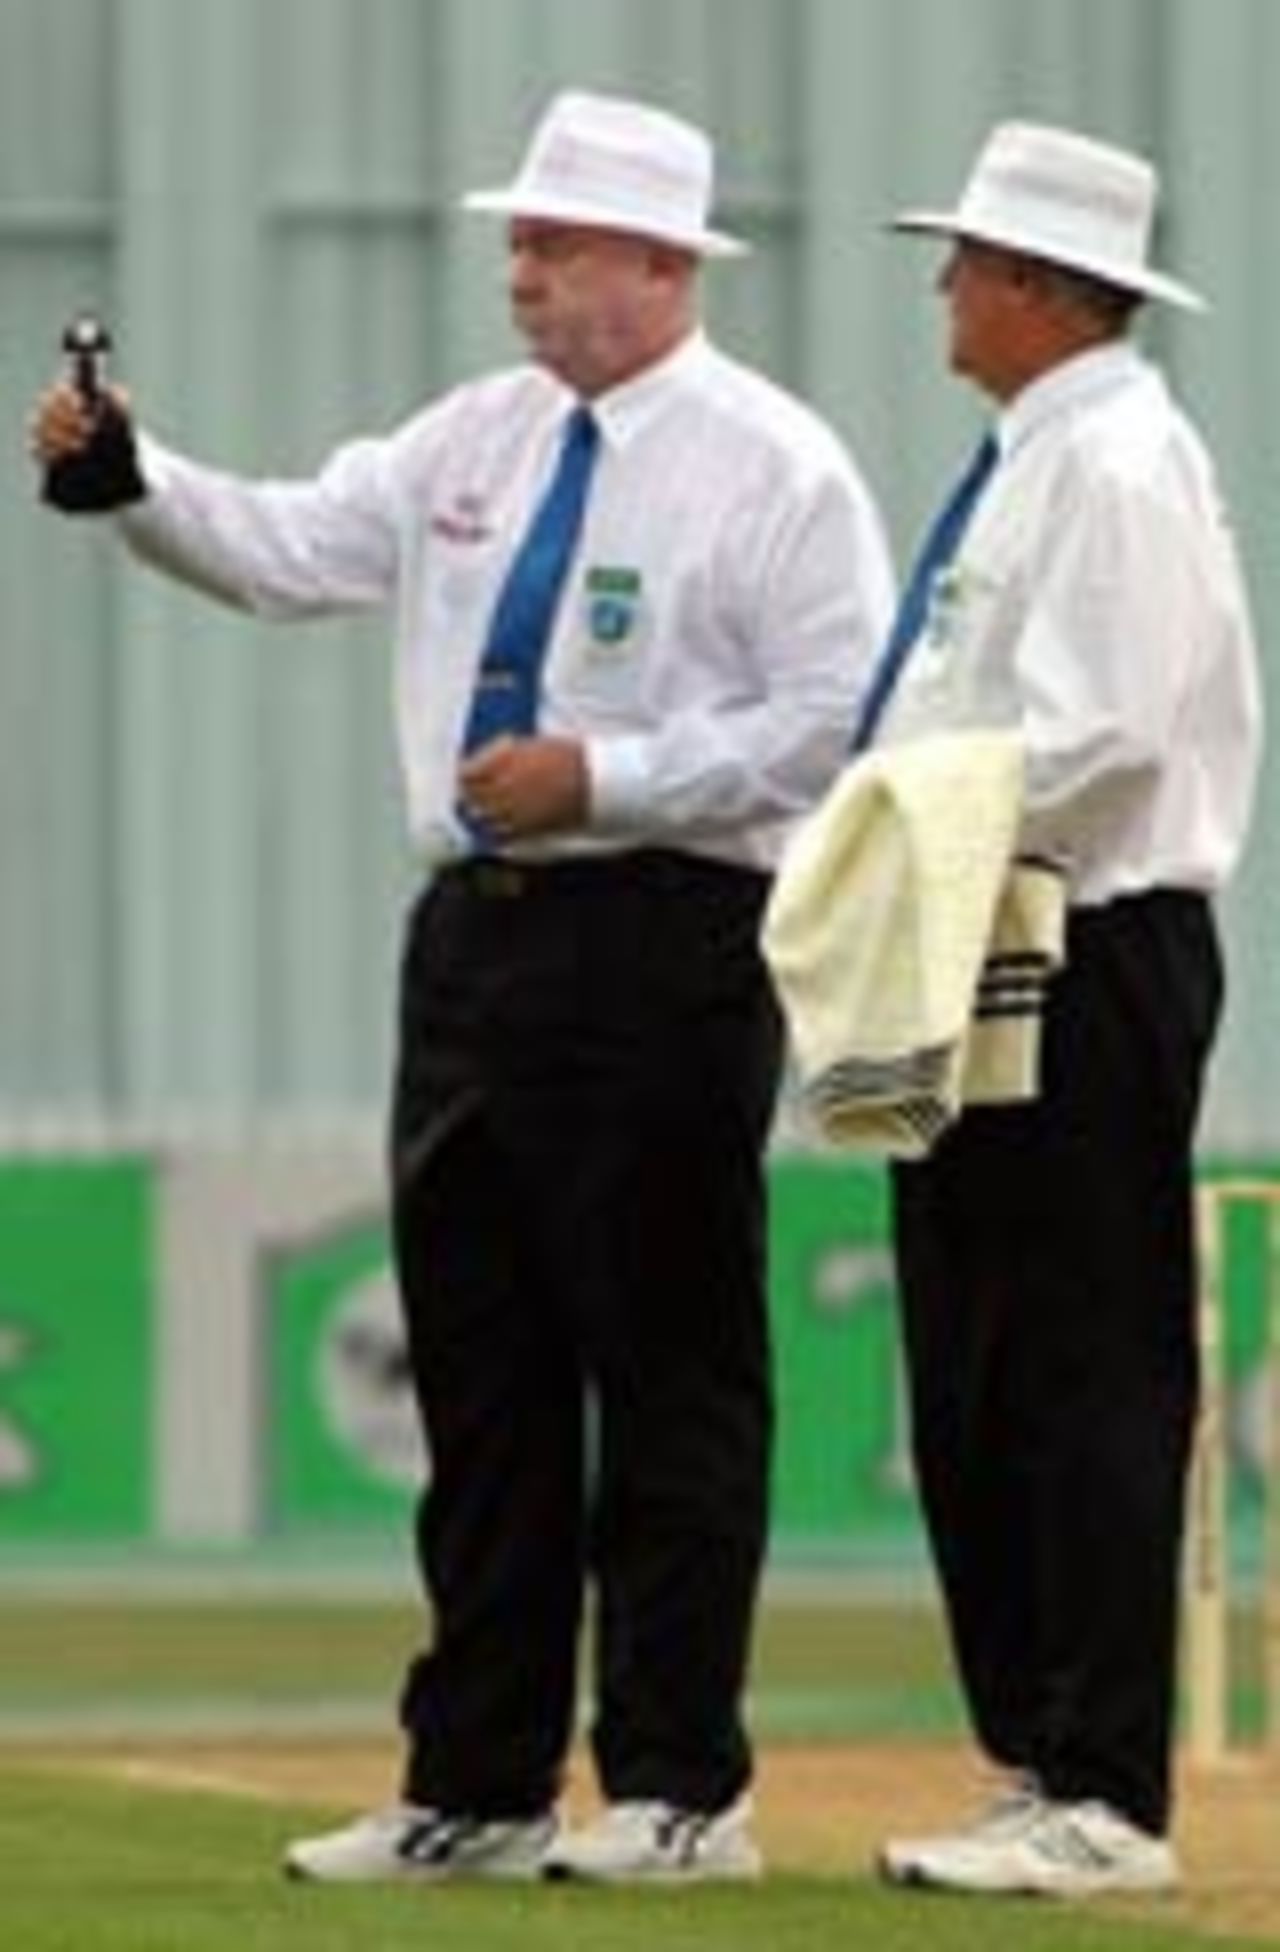 Umpires check if the light is good enough, New Zealand v Pakistan, 1st Test, Hamilton, 3rd day, December 21, 2003